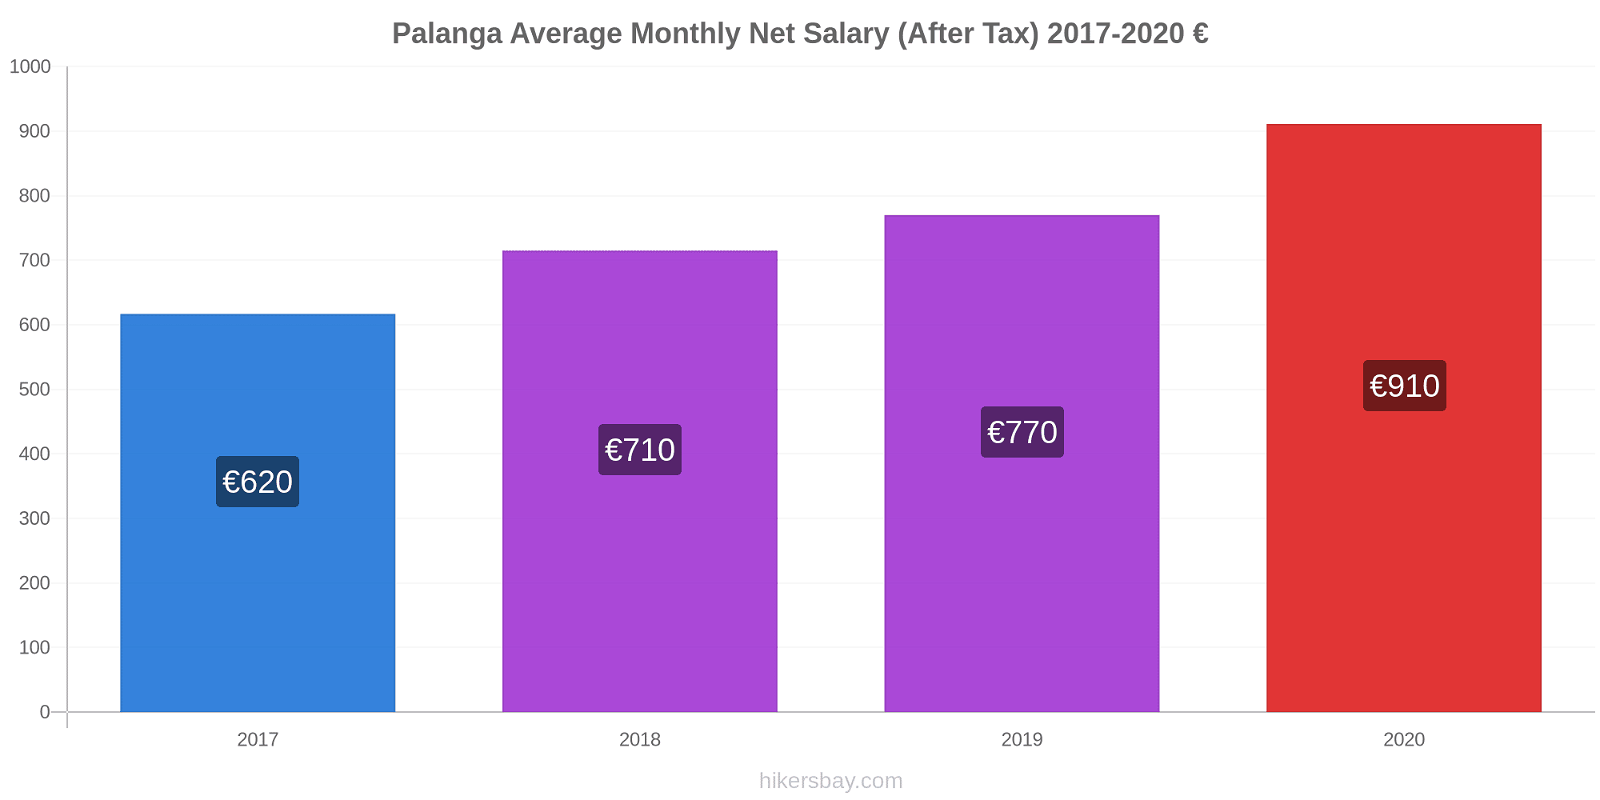 Palanga price changes Average Monthly Net Salary (After Tax) hikersbay.com